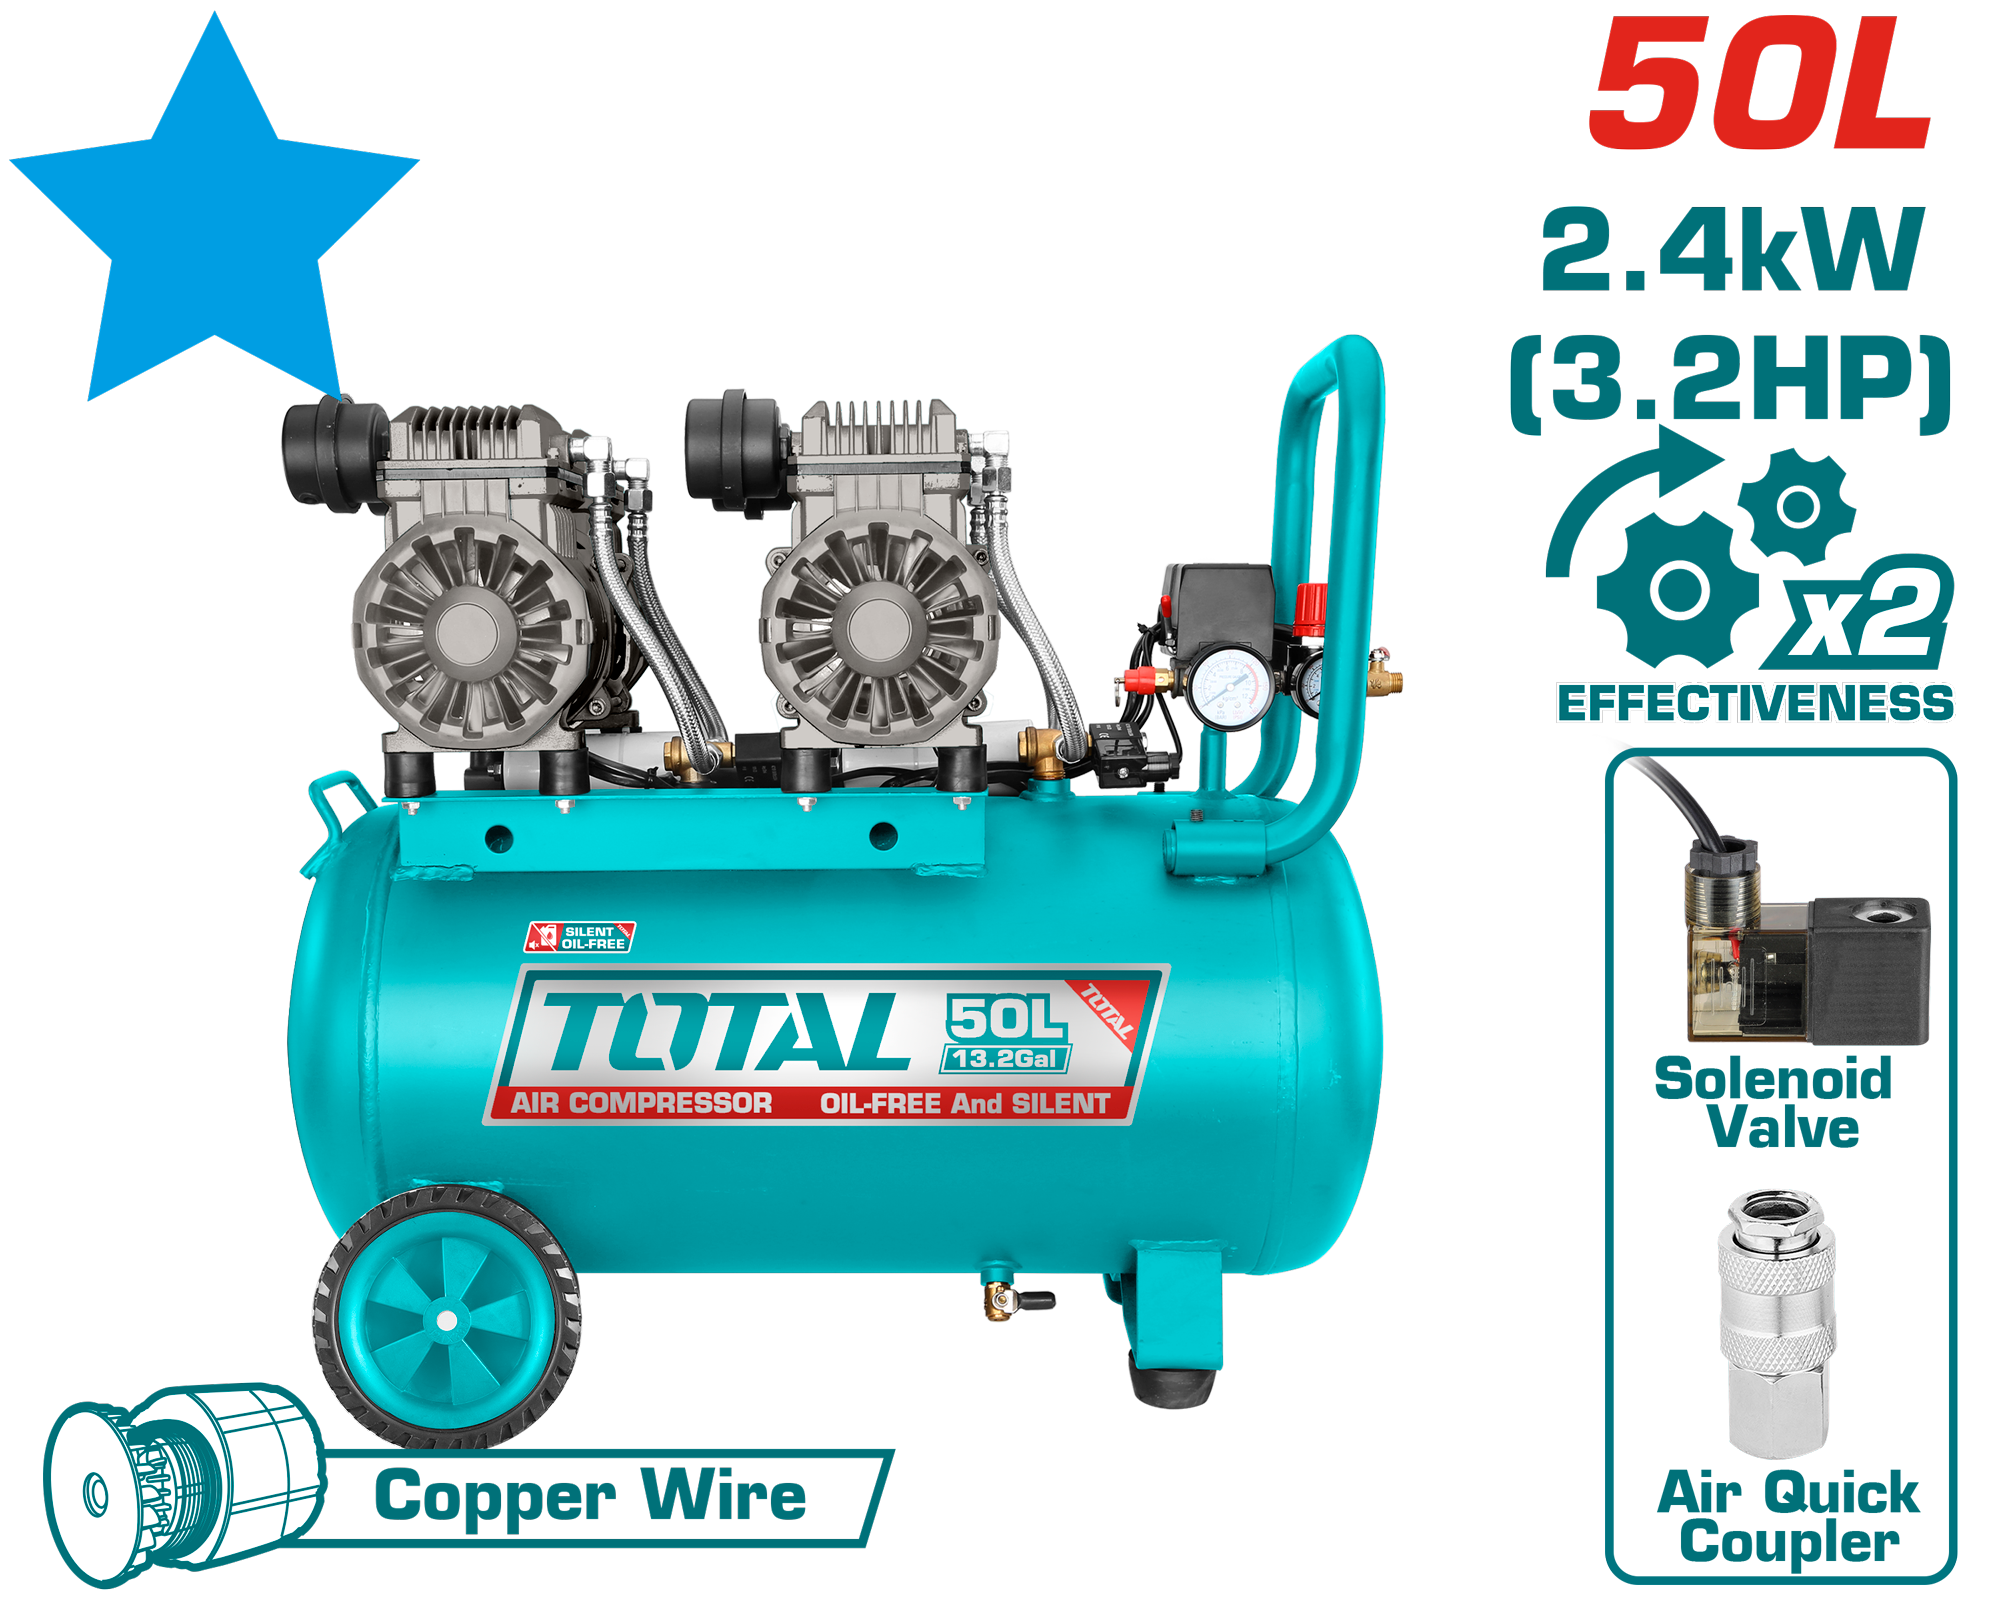 AIR COMPRESSOR SILENT AND OIL FREE 50 LIT 2 HEAD 3.2 HP